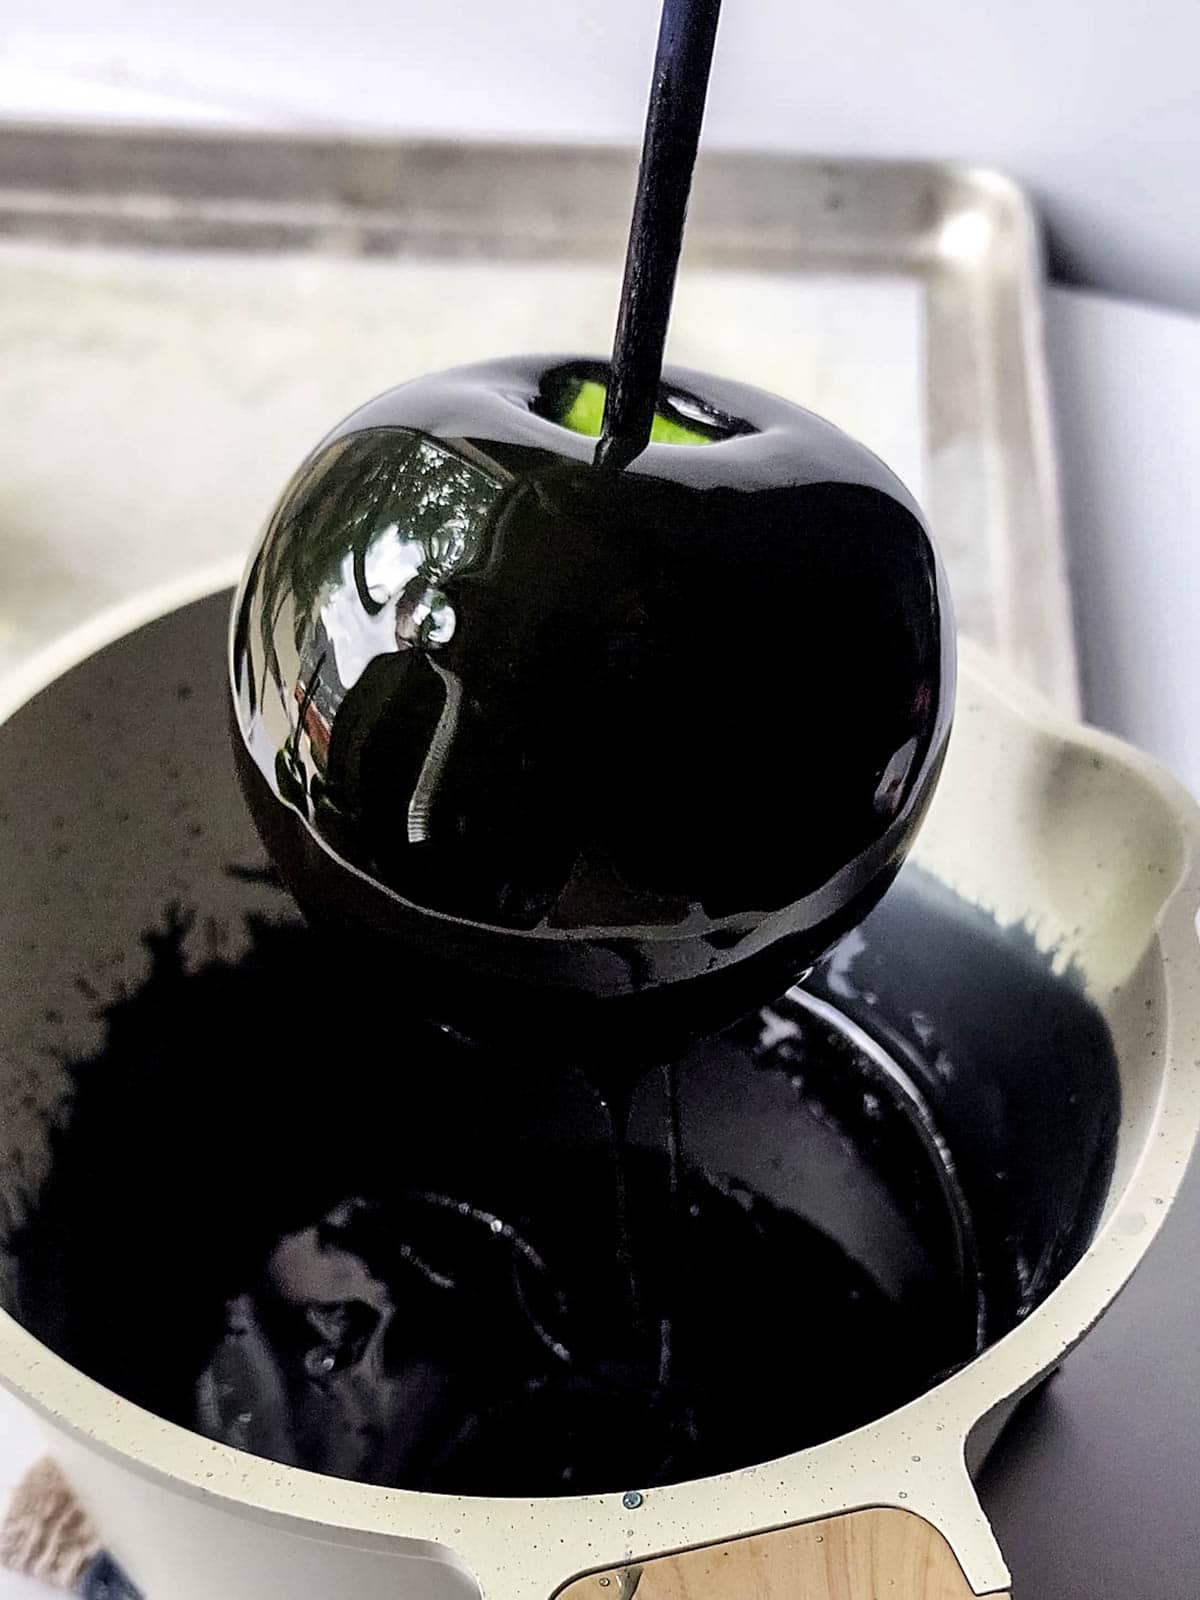 Dipping apple into black syrup mixture